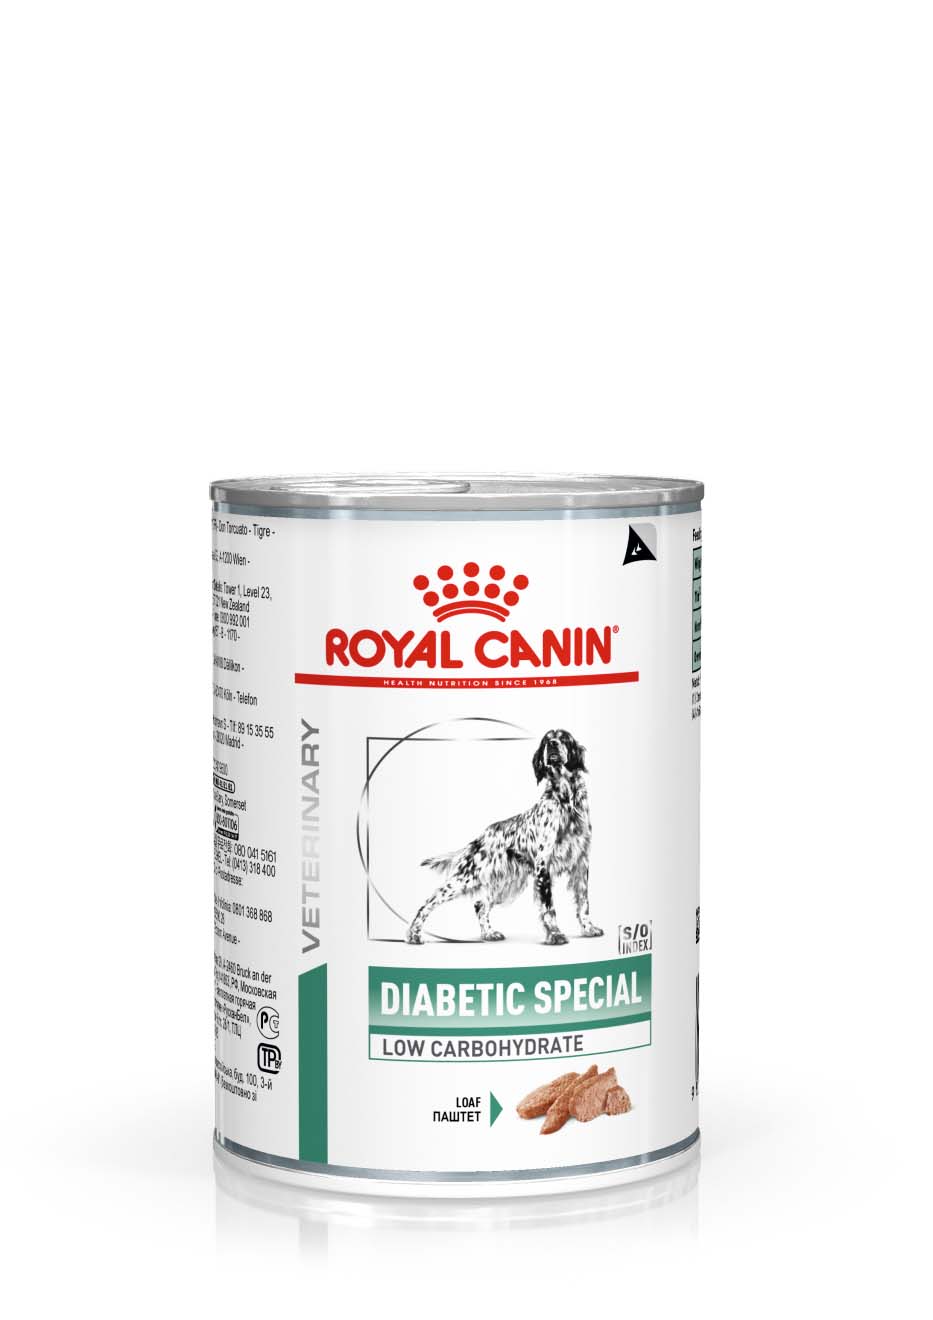 Royal Canin Diabetic Special Low Carbohydrate Hond - blik 12x410g